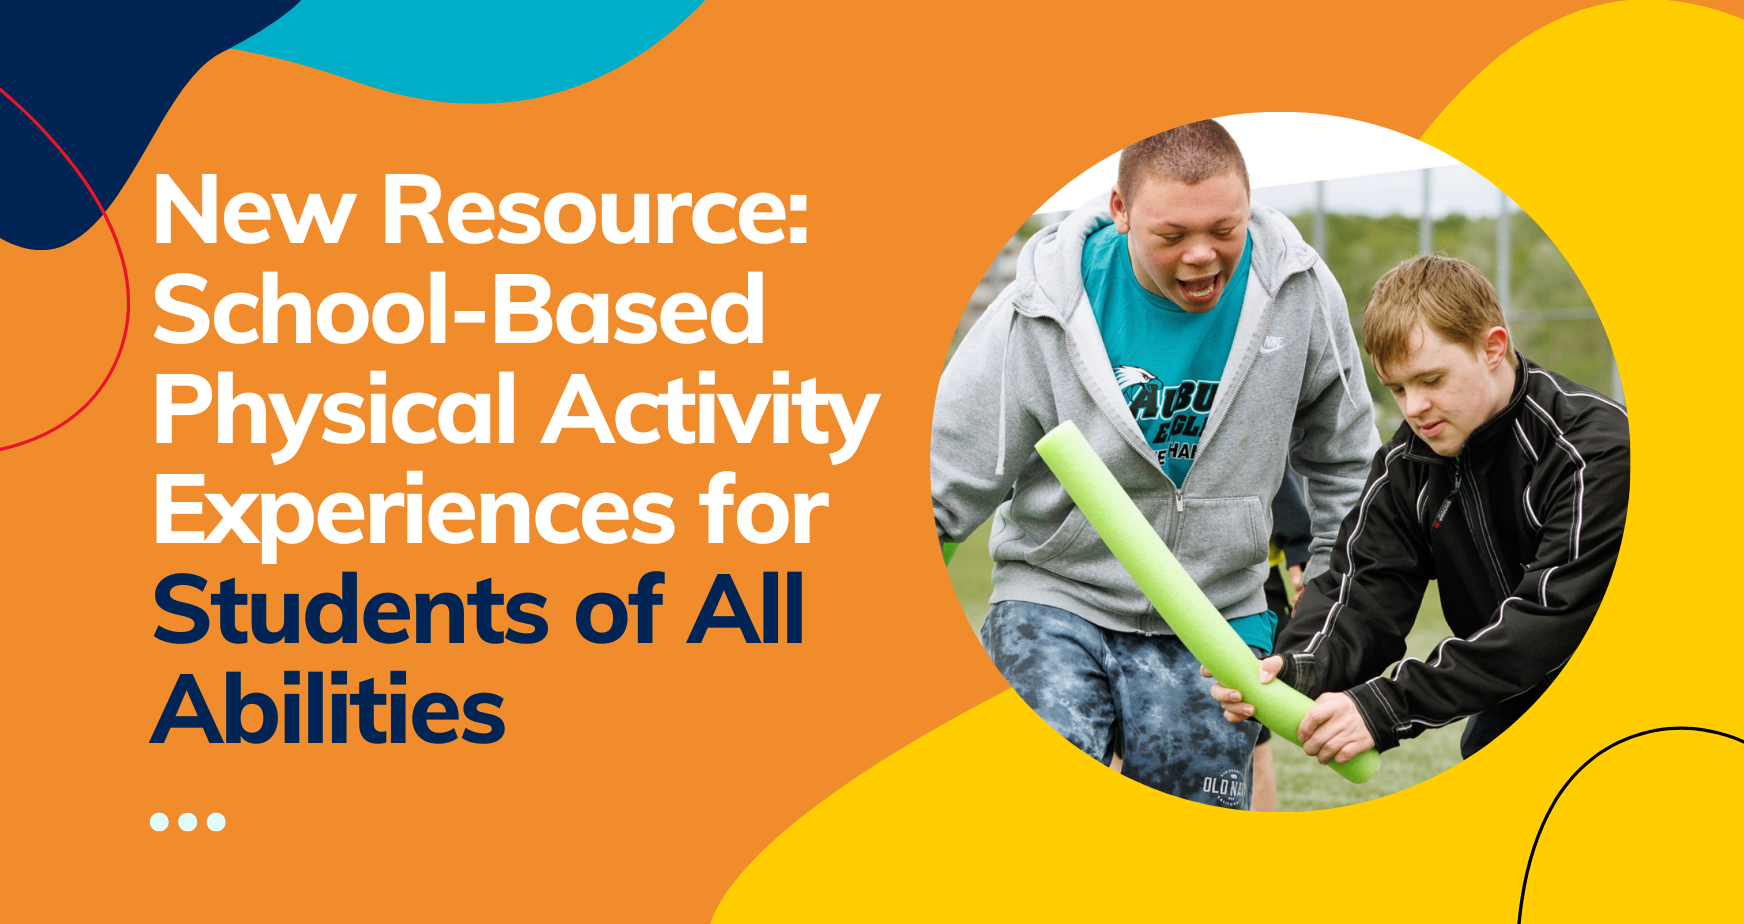 School-Based Physical Activity Experiences for Students of All Abilities